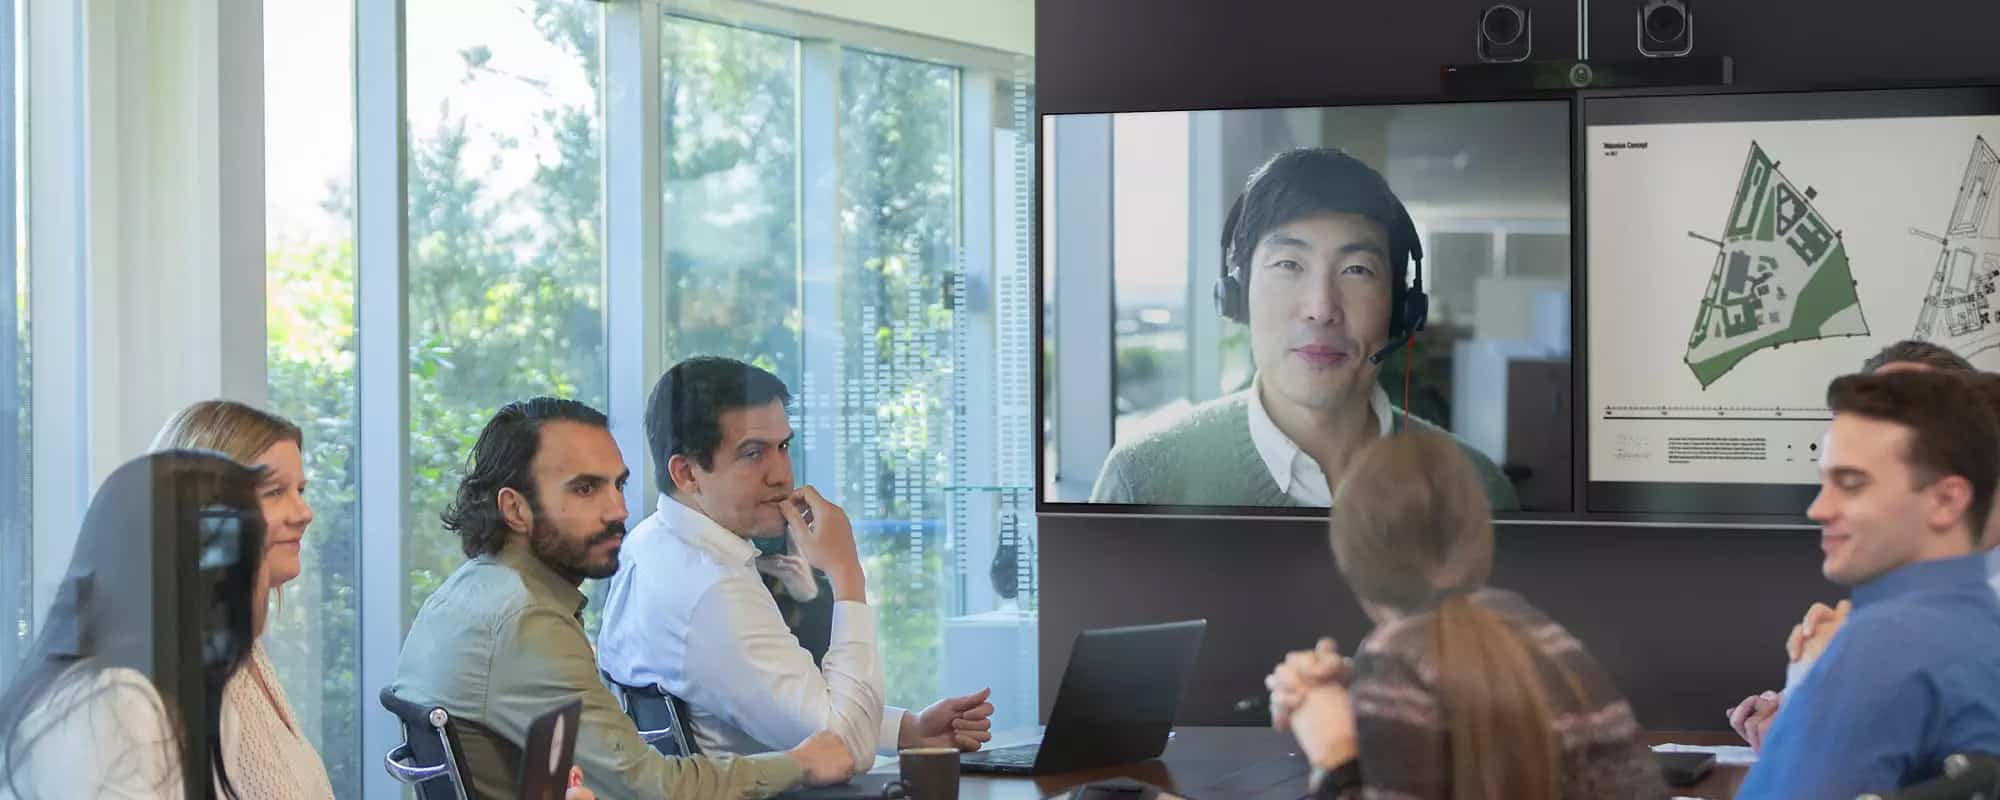 meeting room with staff and remote worker on screen